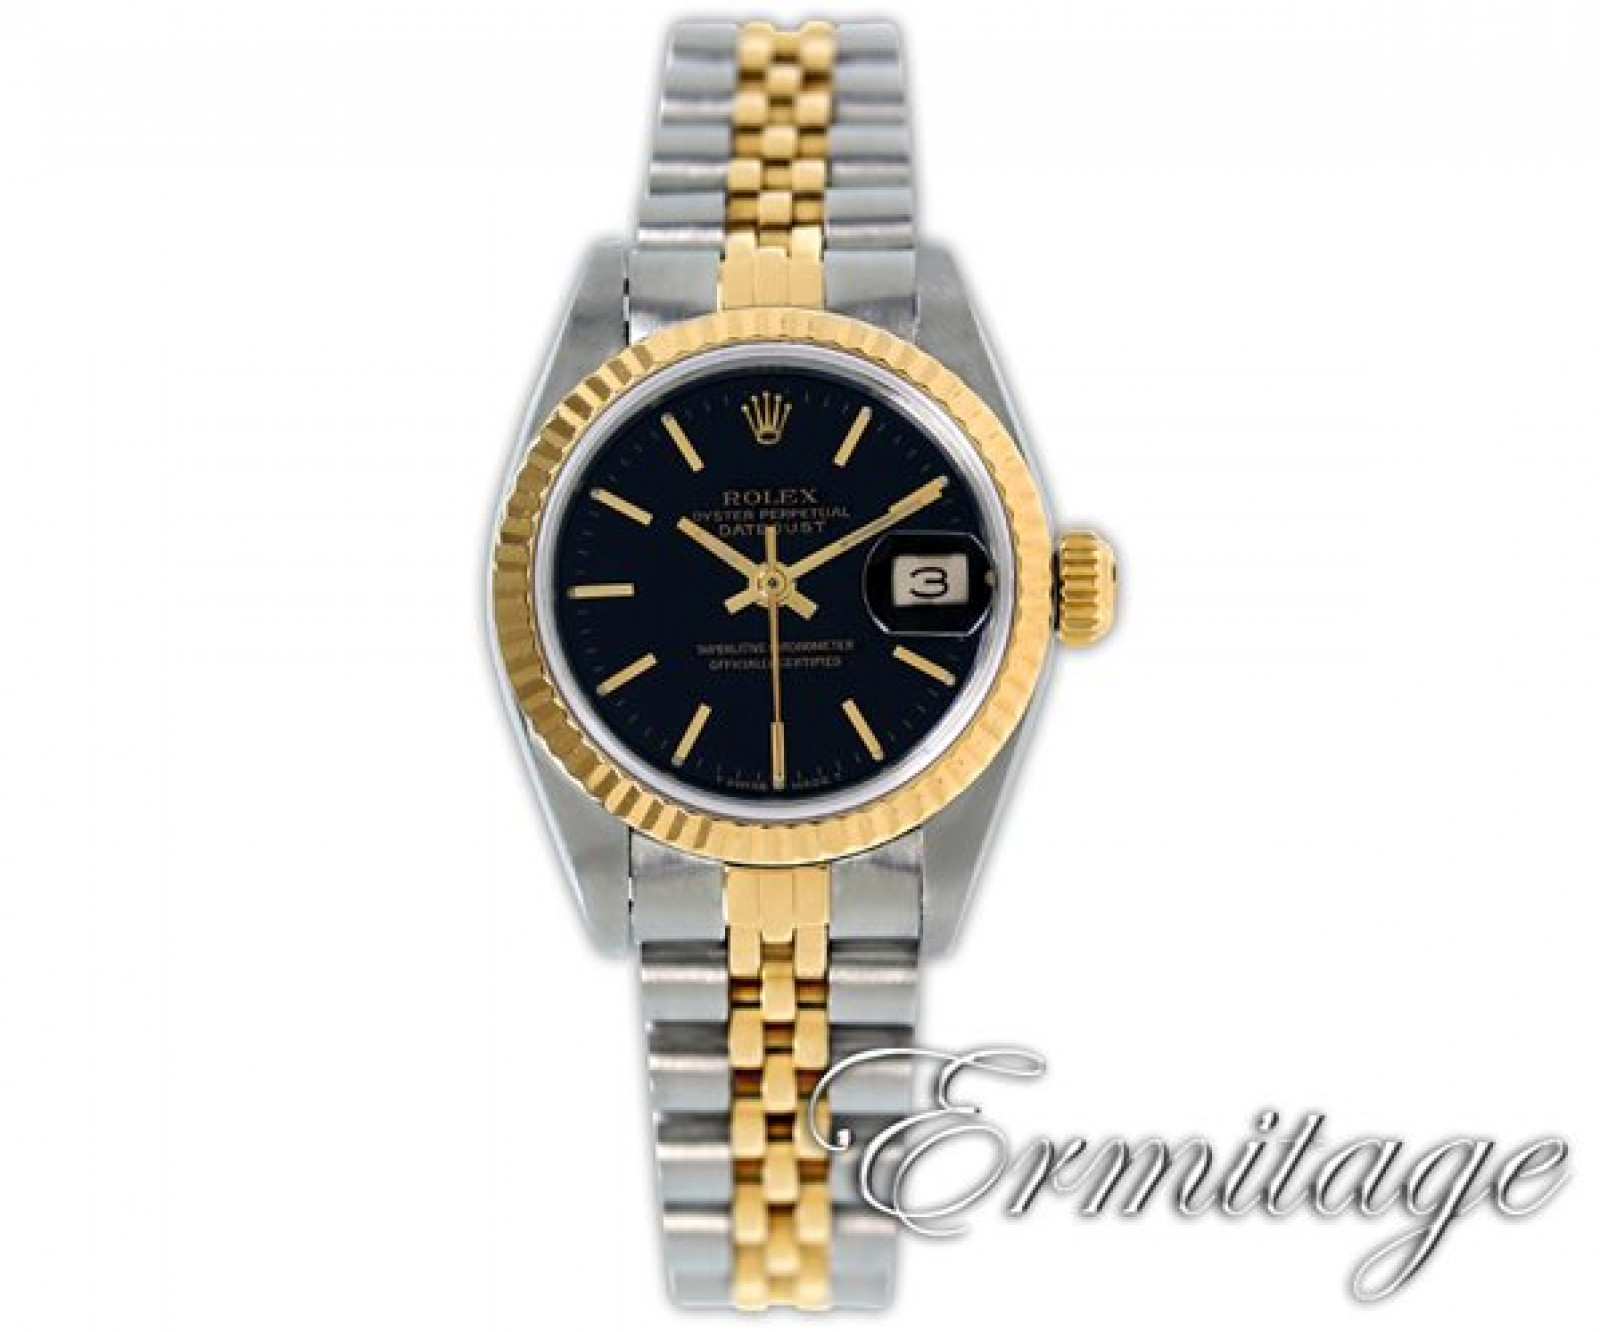 Rolex Datejust 69173 Gold & Steel With Black Dial